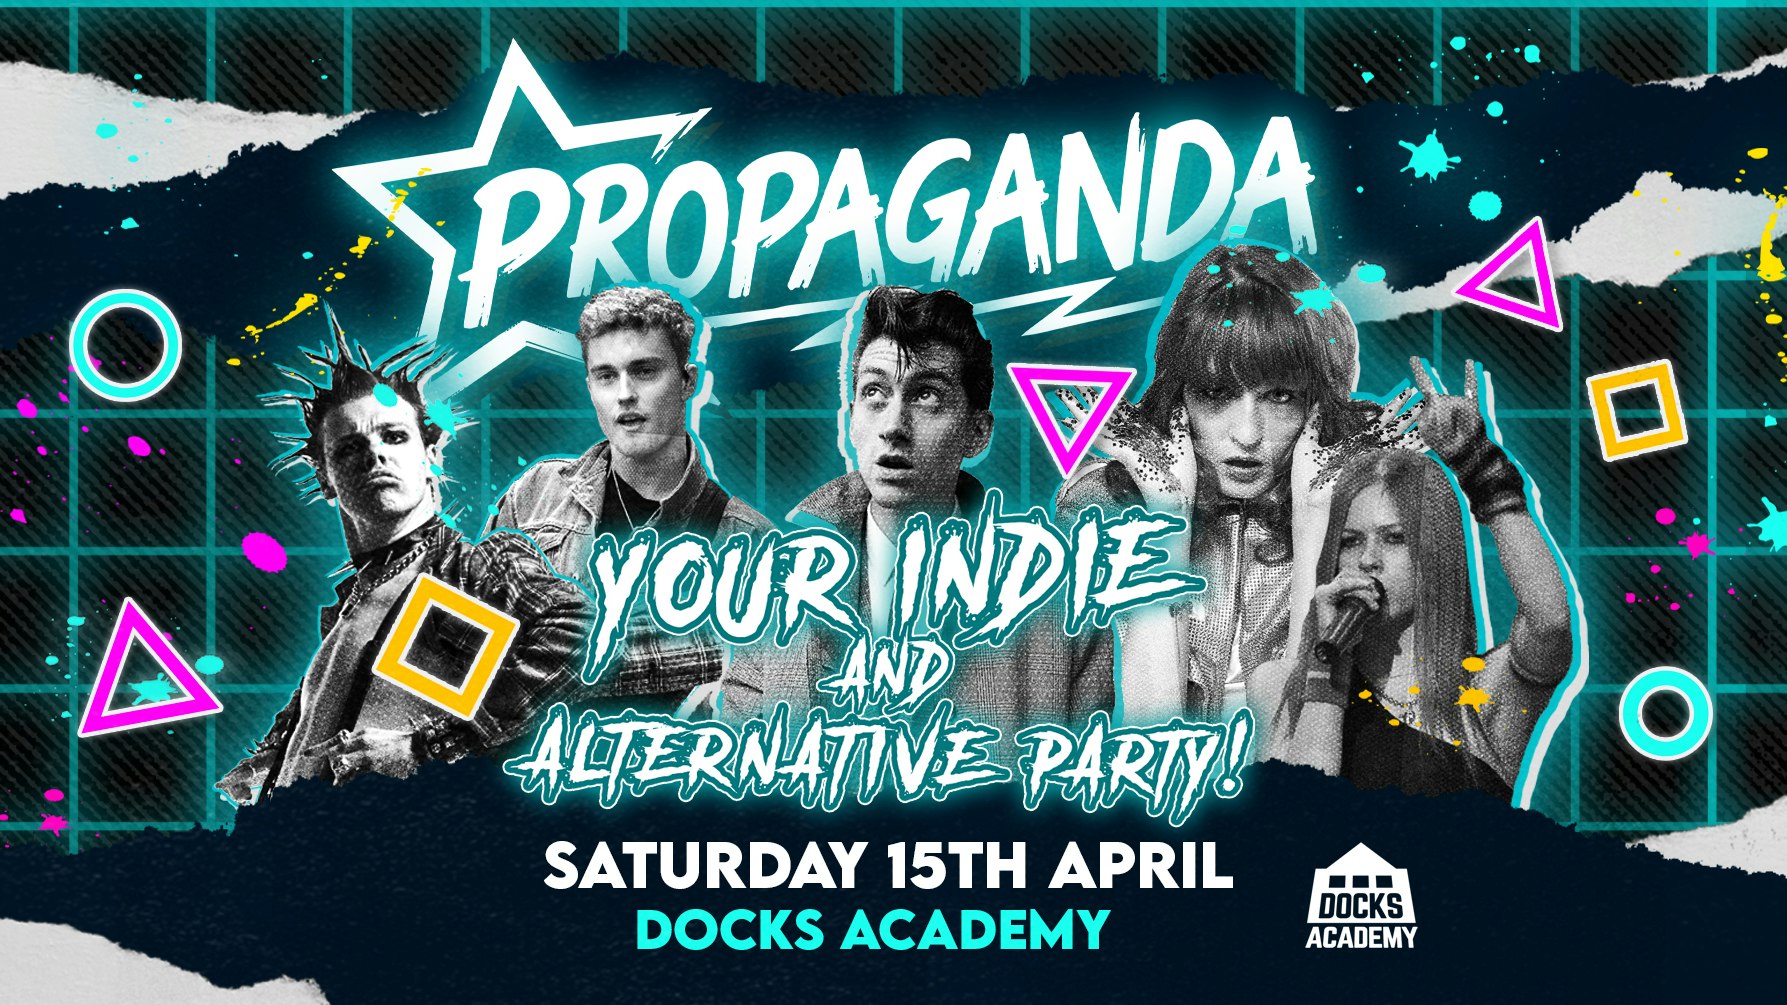 Propaganda – Your Indie and Alternative Party!